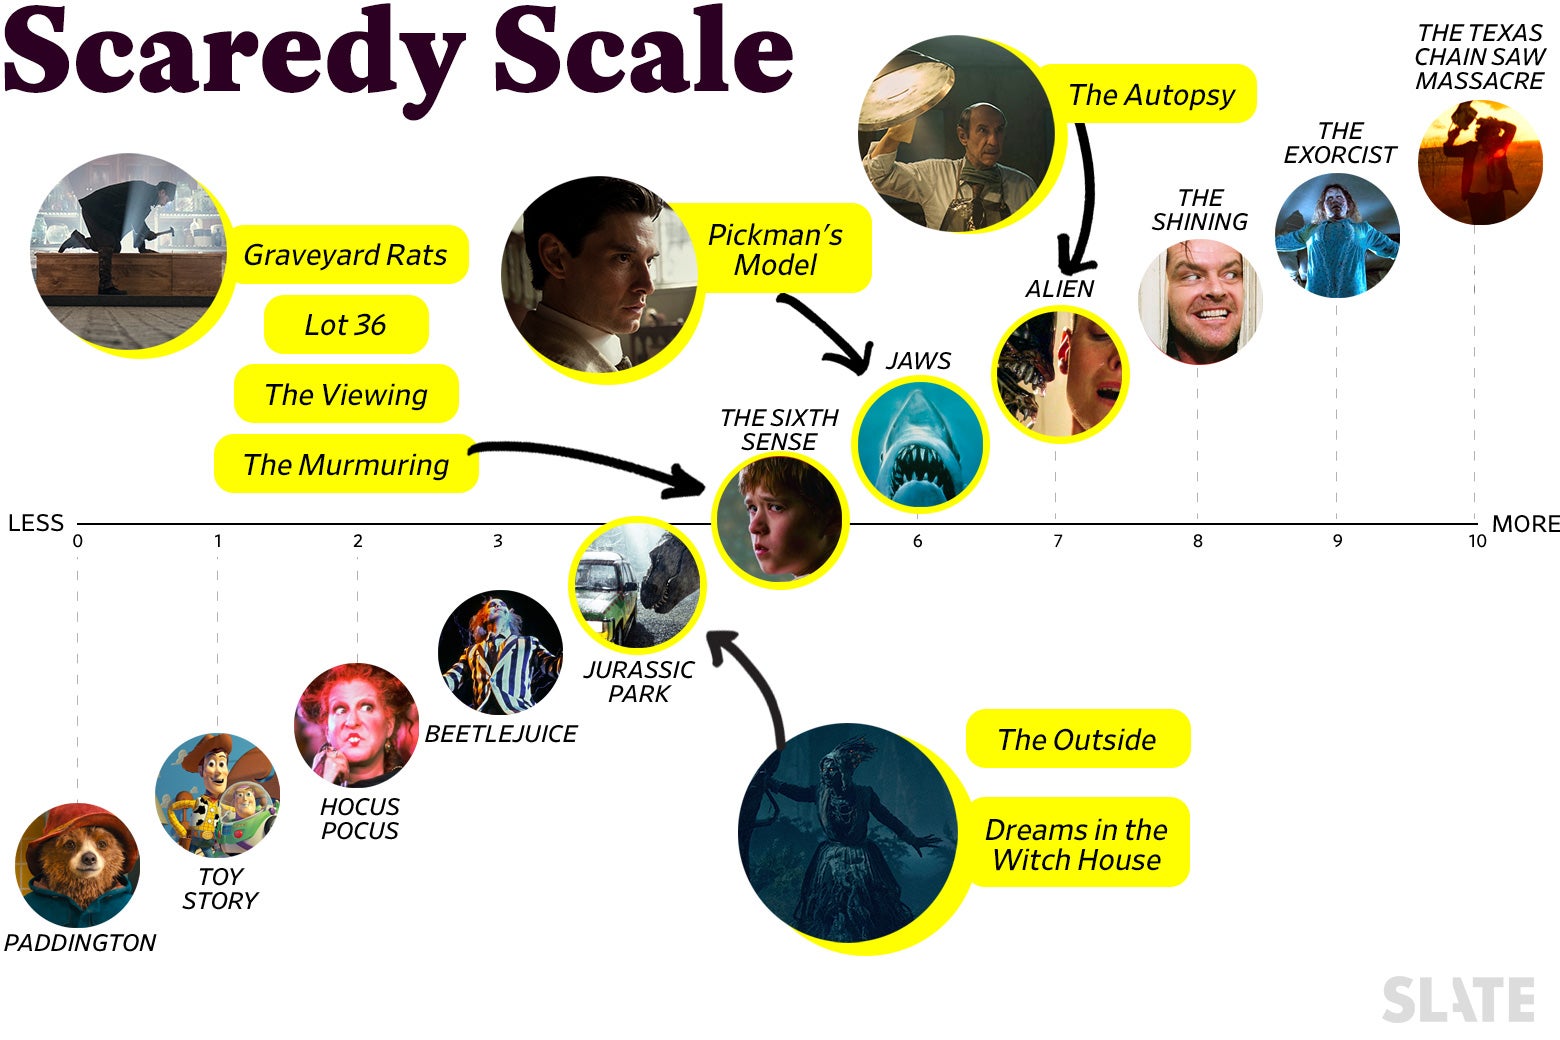 A chart reading "Scaredy Scale" graphs each episode onto classic horror movies. "The Autopsy” is a 7, roughly equivalent to Alien, 
"Pickman's Model” is a 6, roughly equivalent to Jaws, "Graveyard Rats," "Lot 36," "The Viewing," and The Murmuring" are all 5, roughly equivalent to The Sixth Sense, and "The Outside" and "Dreams in the Witch House" are both 4s, roughly equivalent to Jurassic Park.